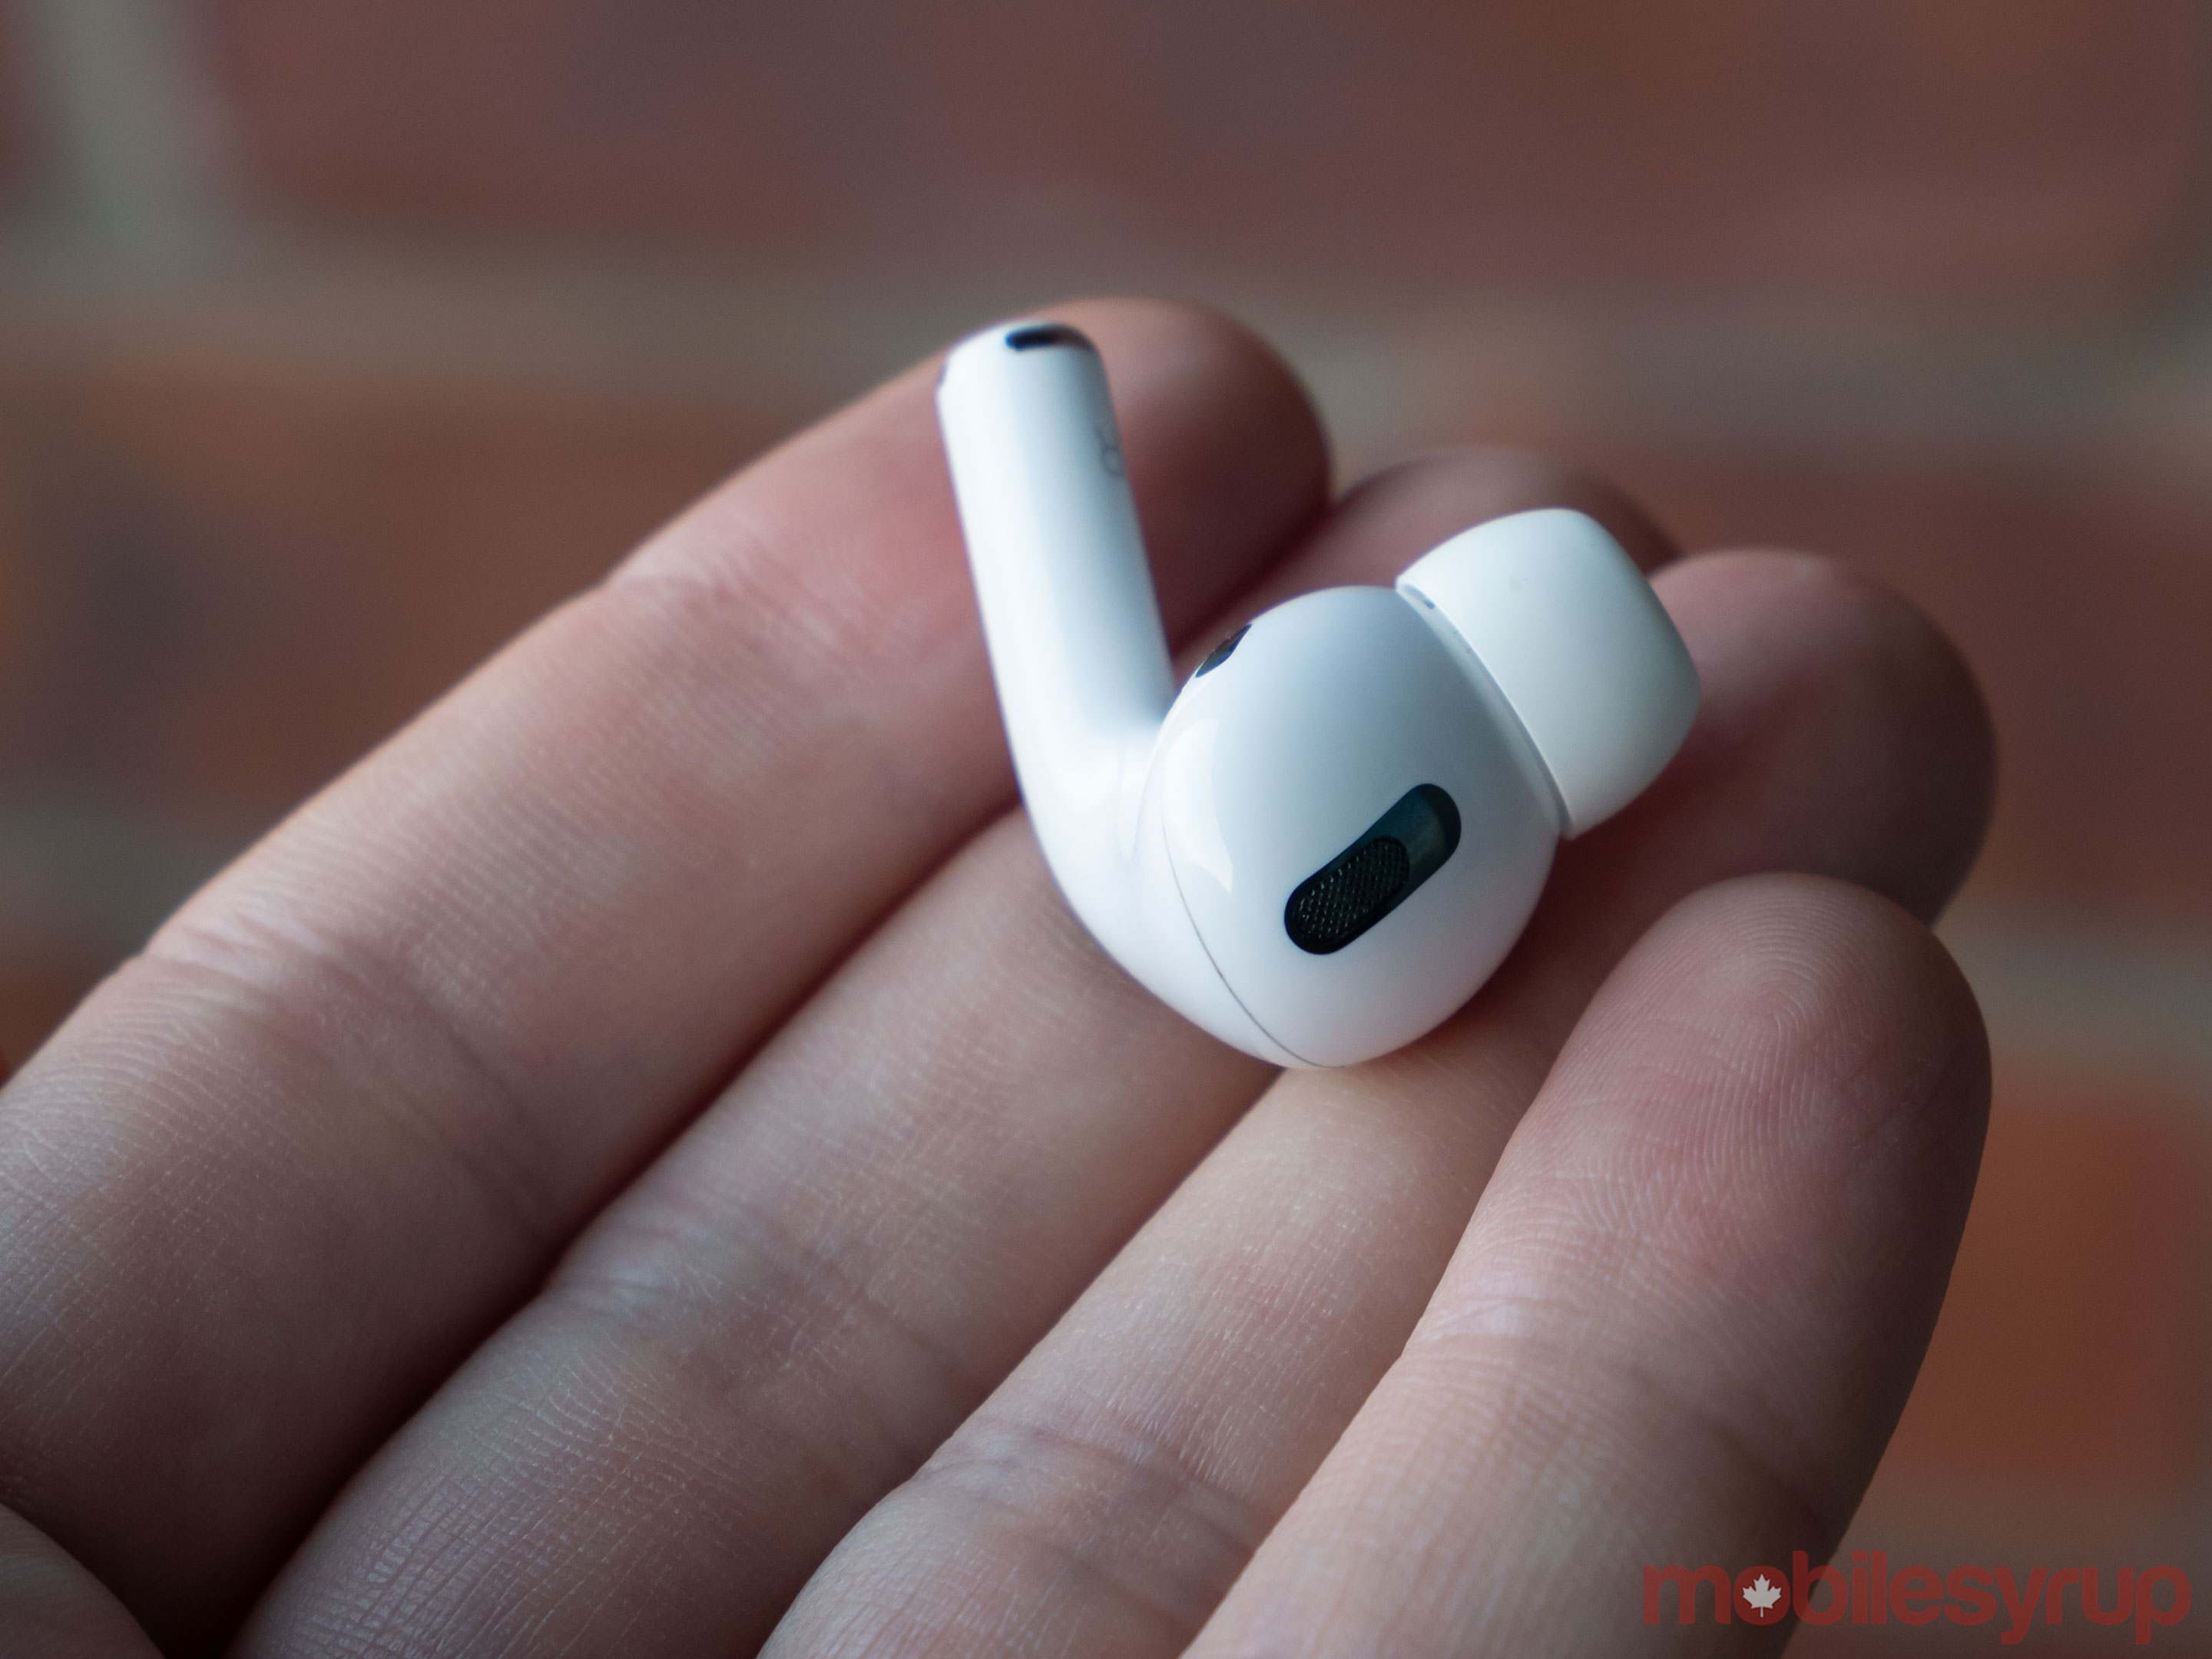 One AirPod Pro earbud